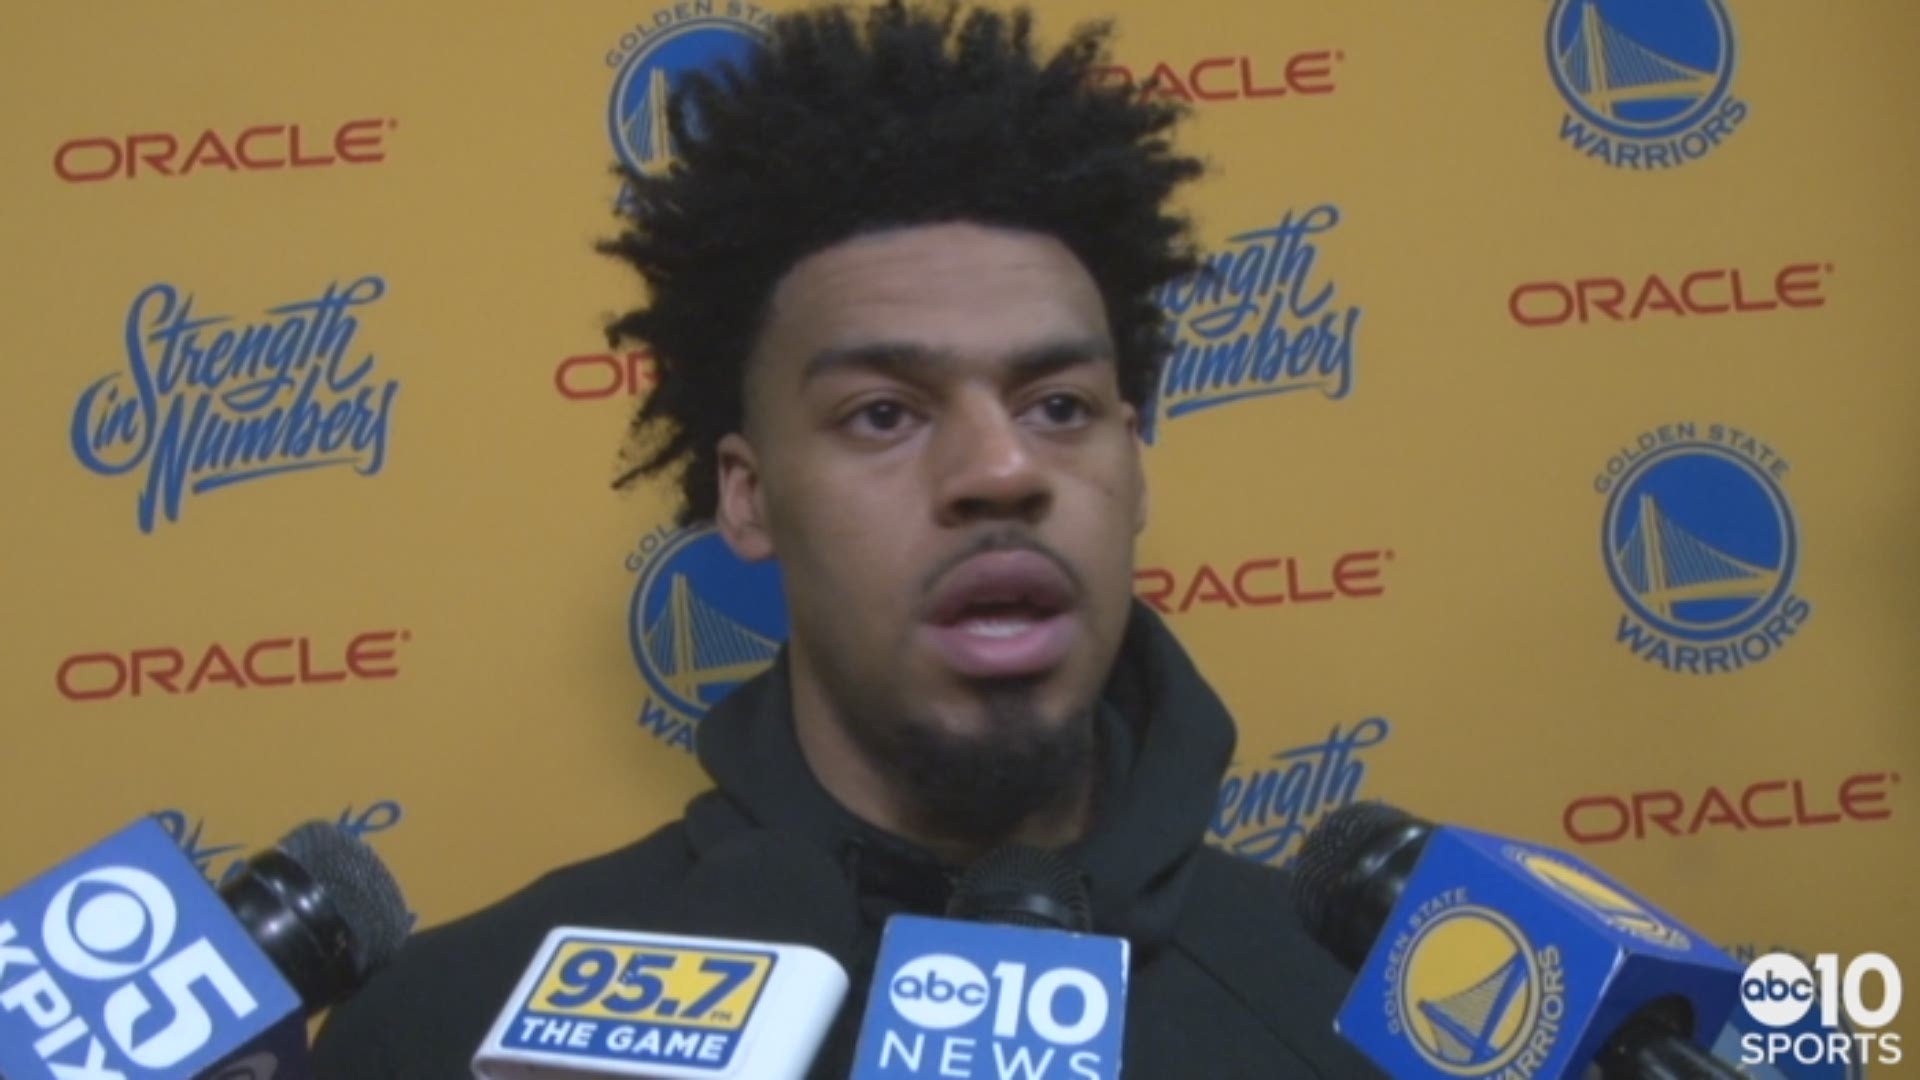 Warriors guard Quinn Cook discusses the team's high level of focus in Saturday's Game 1 playoff win over the San Antonio Spurs, making his playoff debut and the adjustments to the starting lineup.